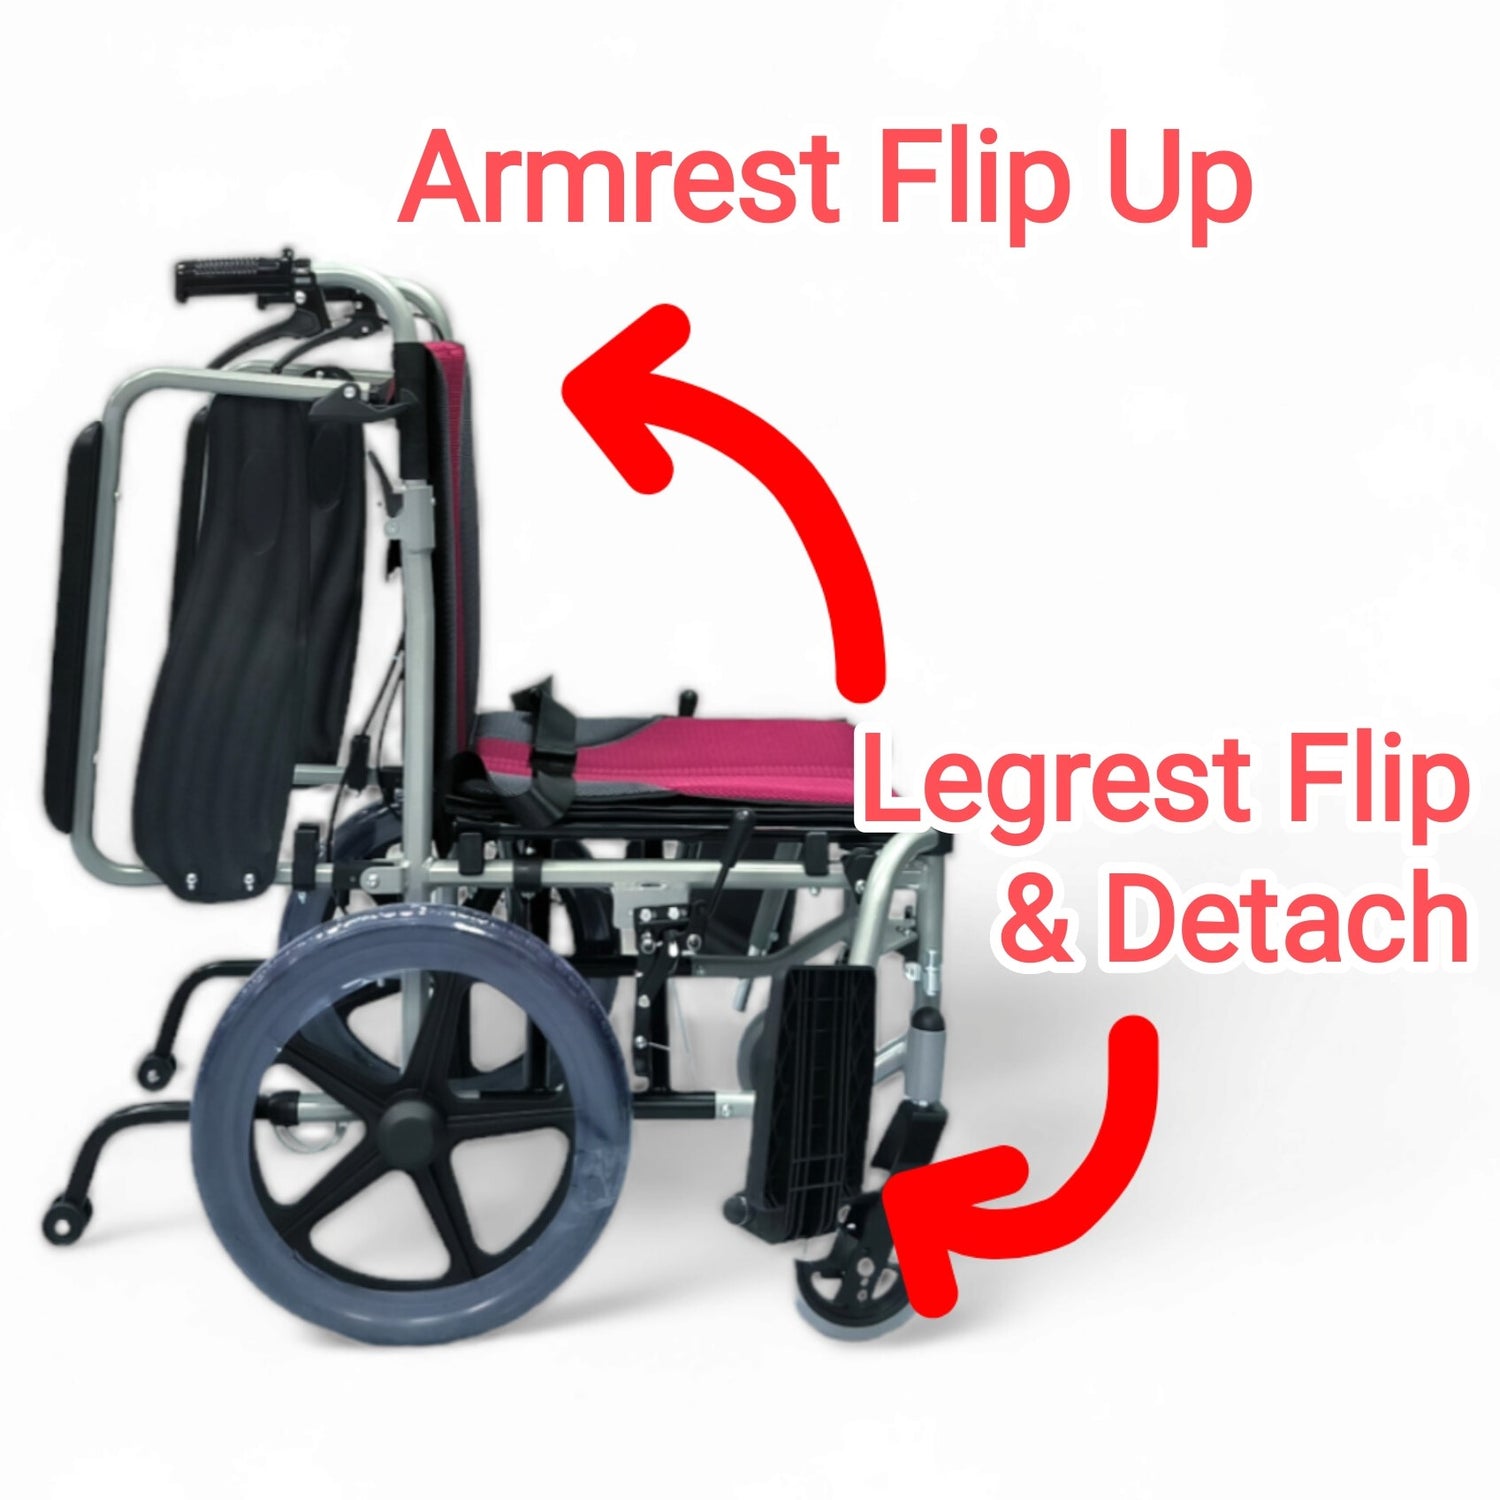 For Stroke Patients - Easy Transfer from the Side of the Wheelchair